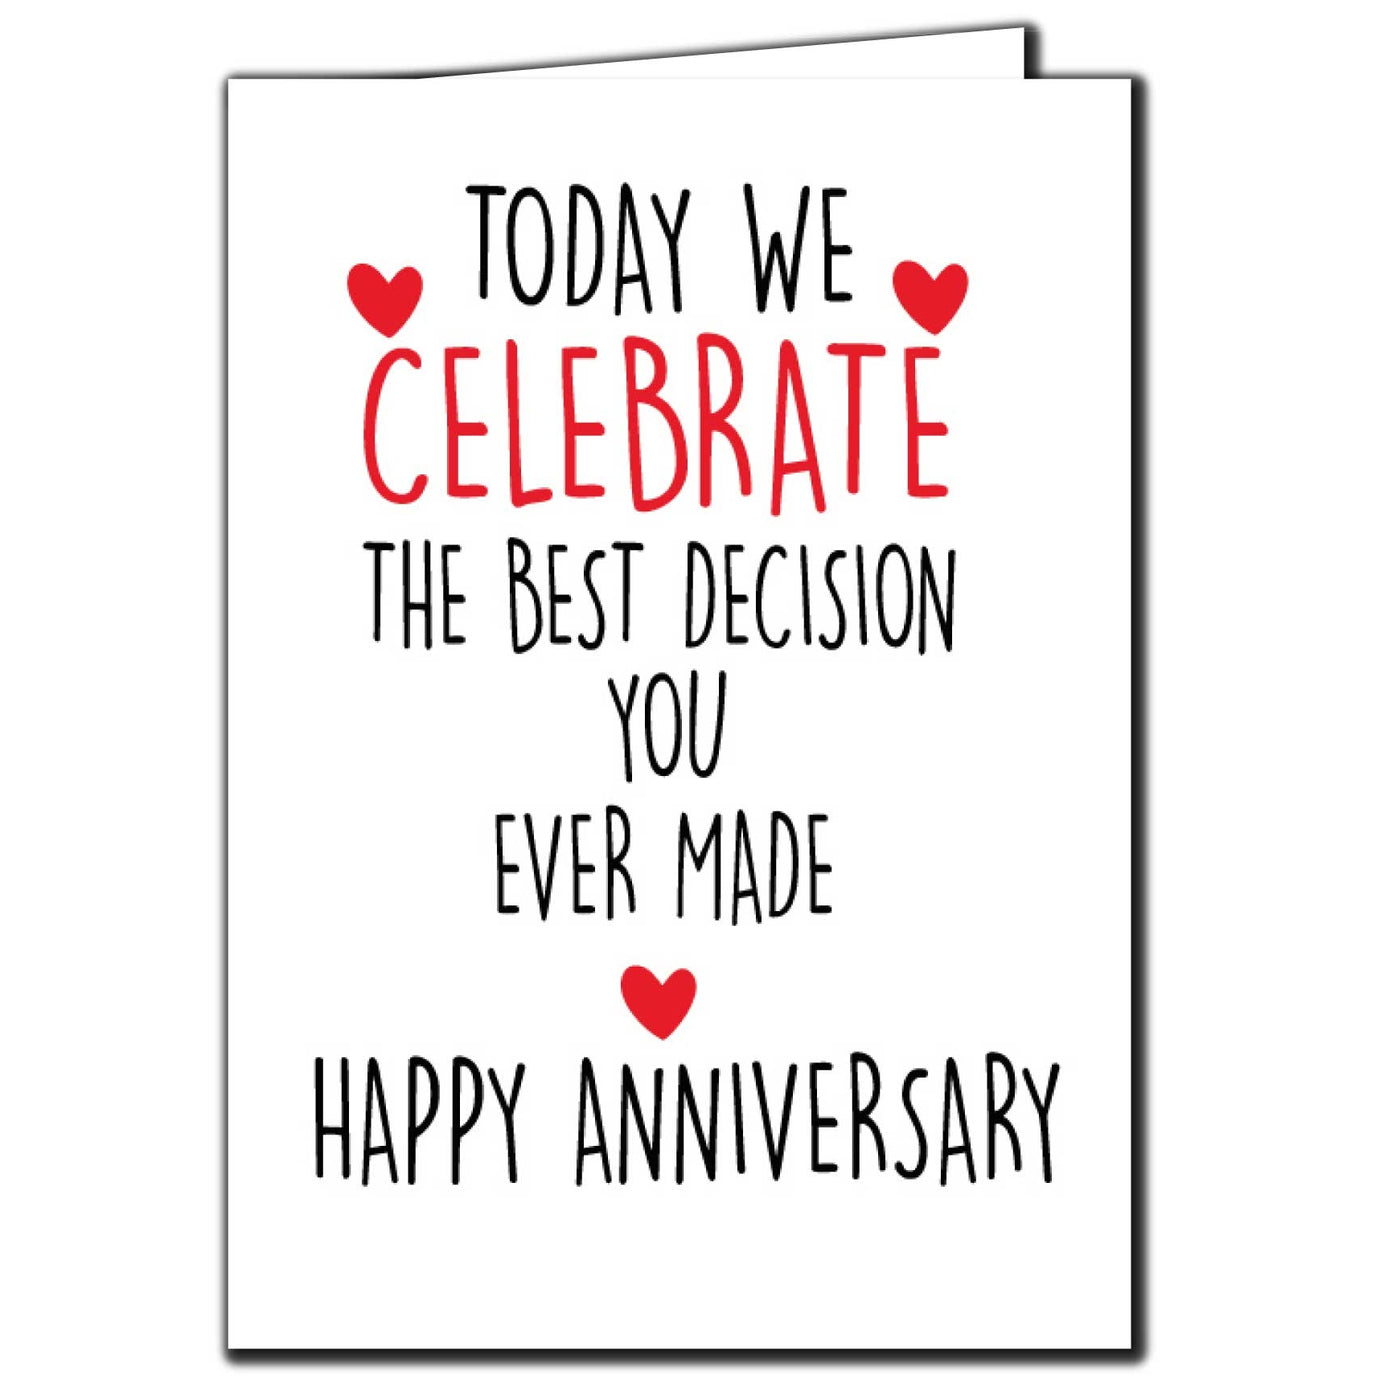 Best Decision You Ever Made Anniversary Greeting Card